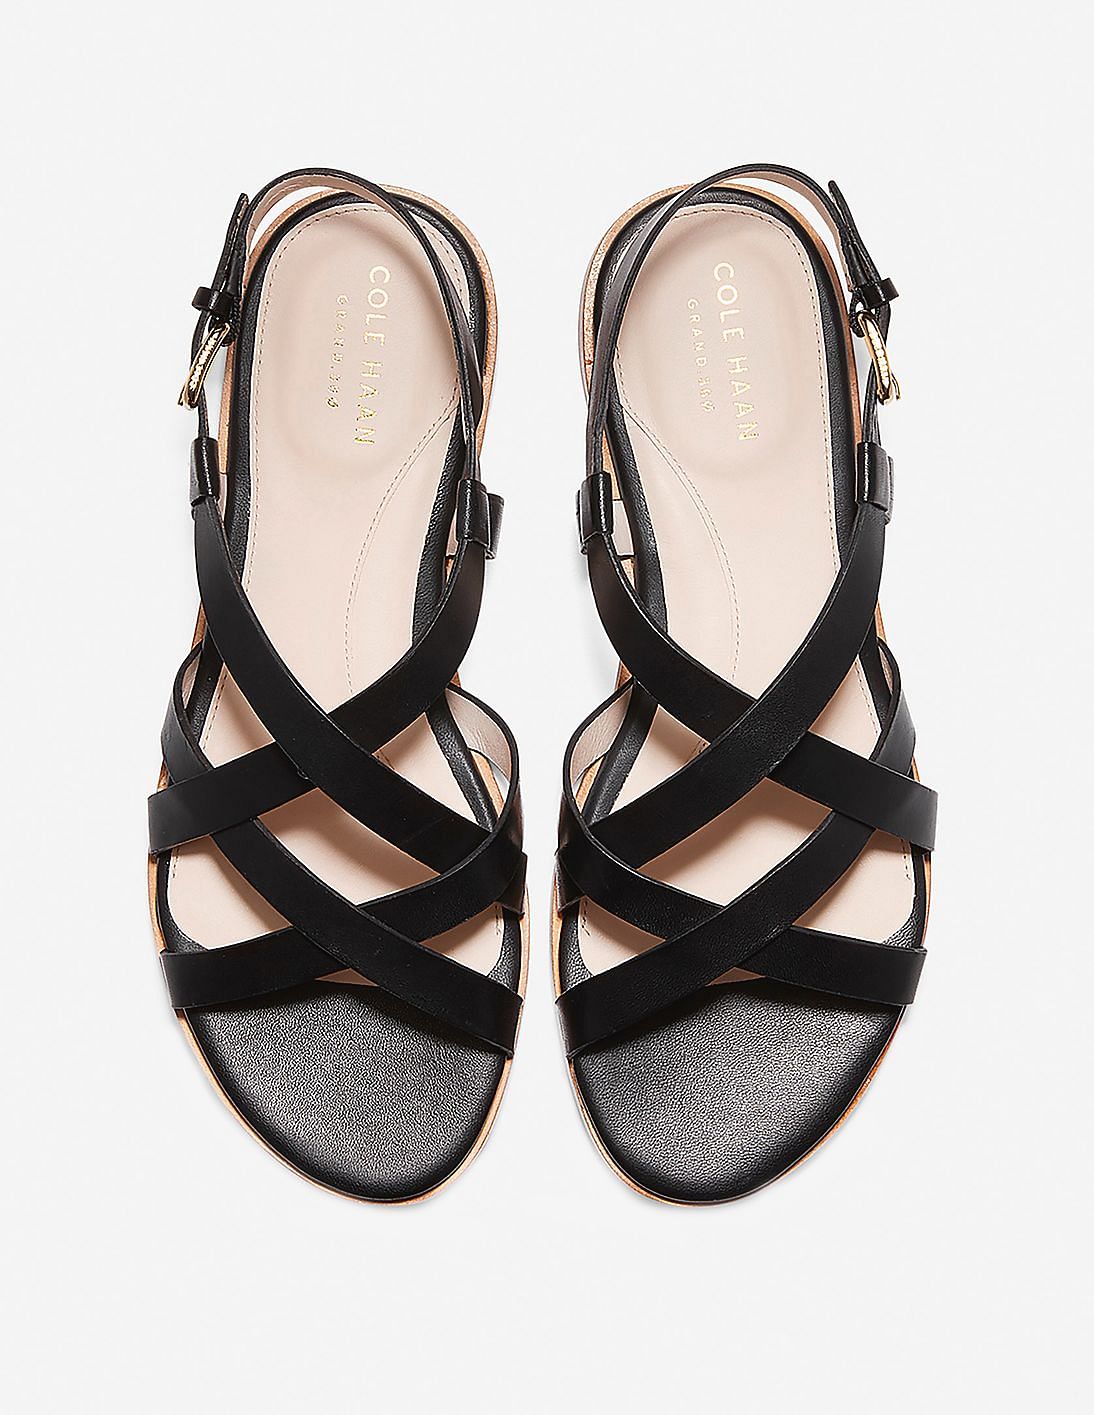 analeigh grand strappy sandal